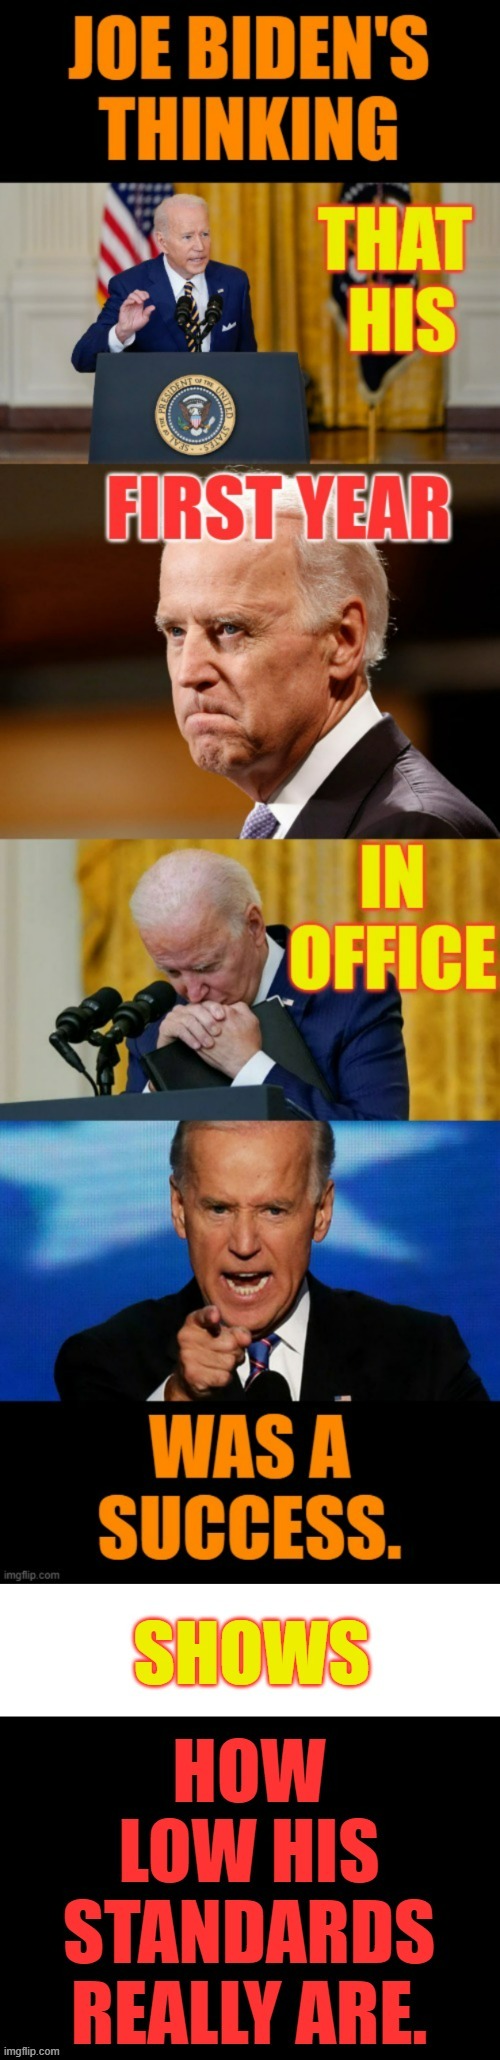 Another Perspective Of His Speech | image tagged in memes,politics,joe biden,success,quality,not really | made w/ Imgflip meme maker